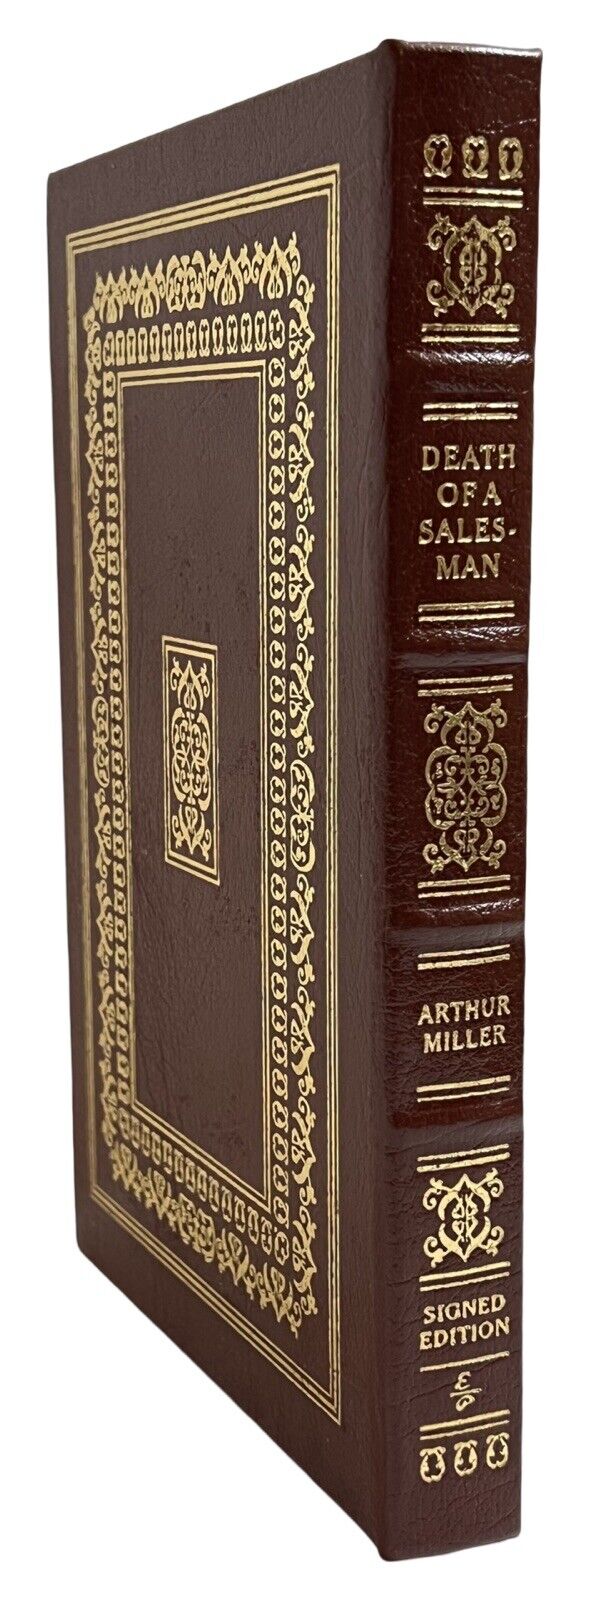 SIGNED Easton Press DEATH OF A SALESMAN Collectors LIMITED Deluxe Edition